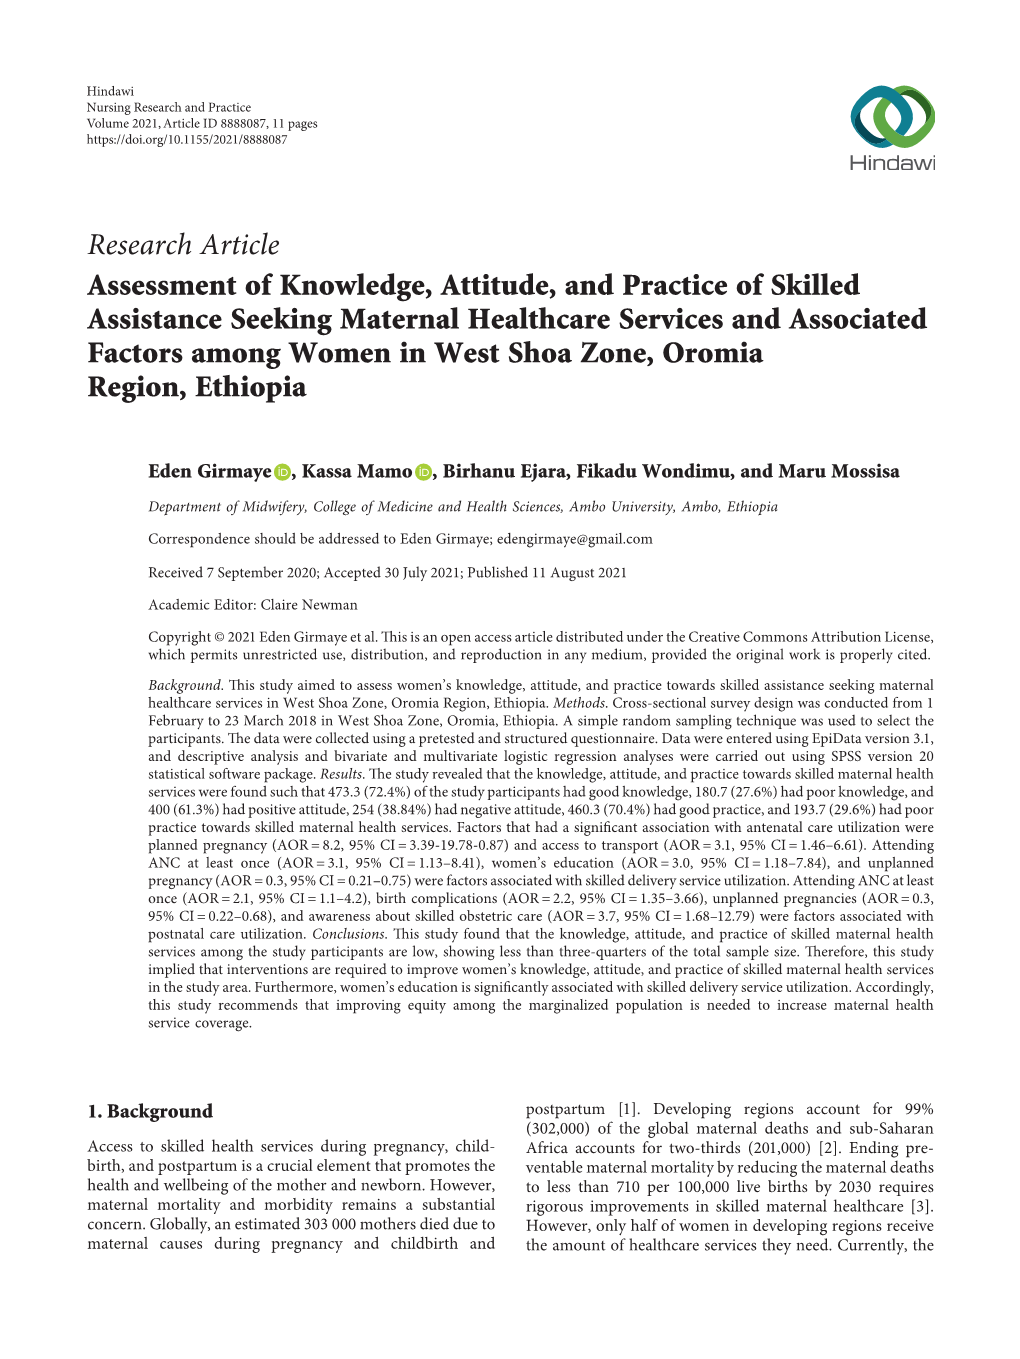 Research Article Assessment of Knowledge, Attitude, and Practice